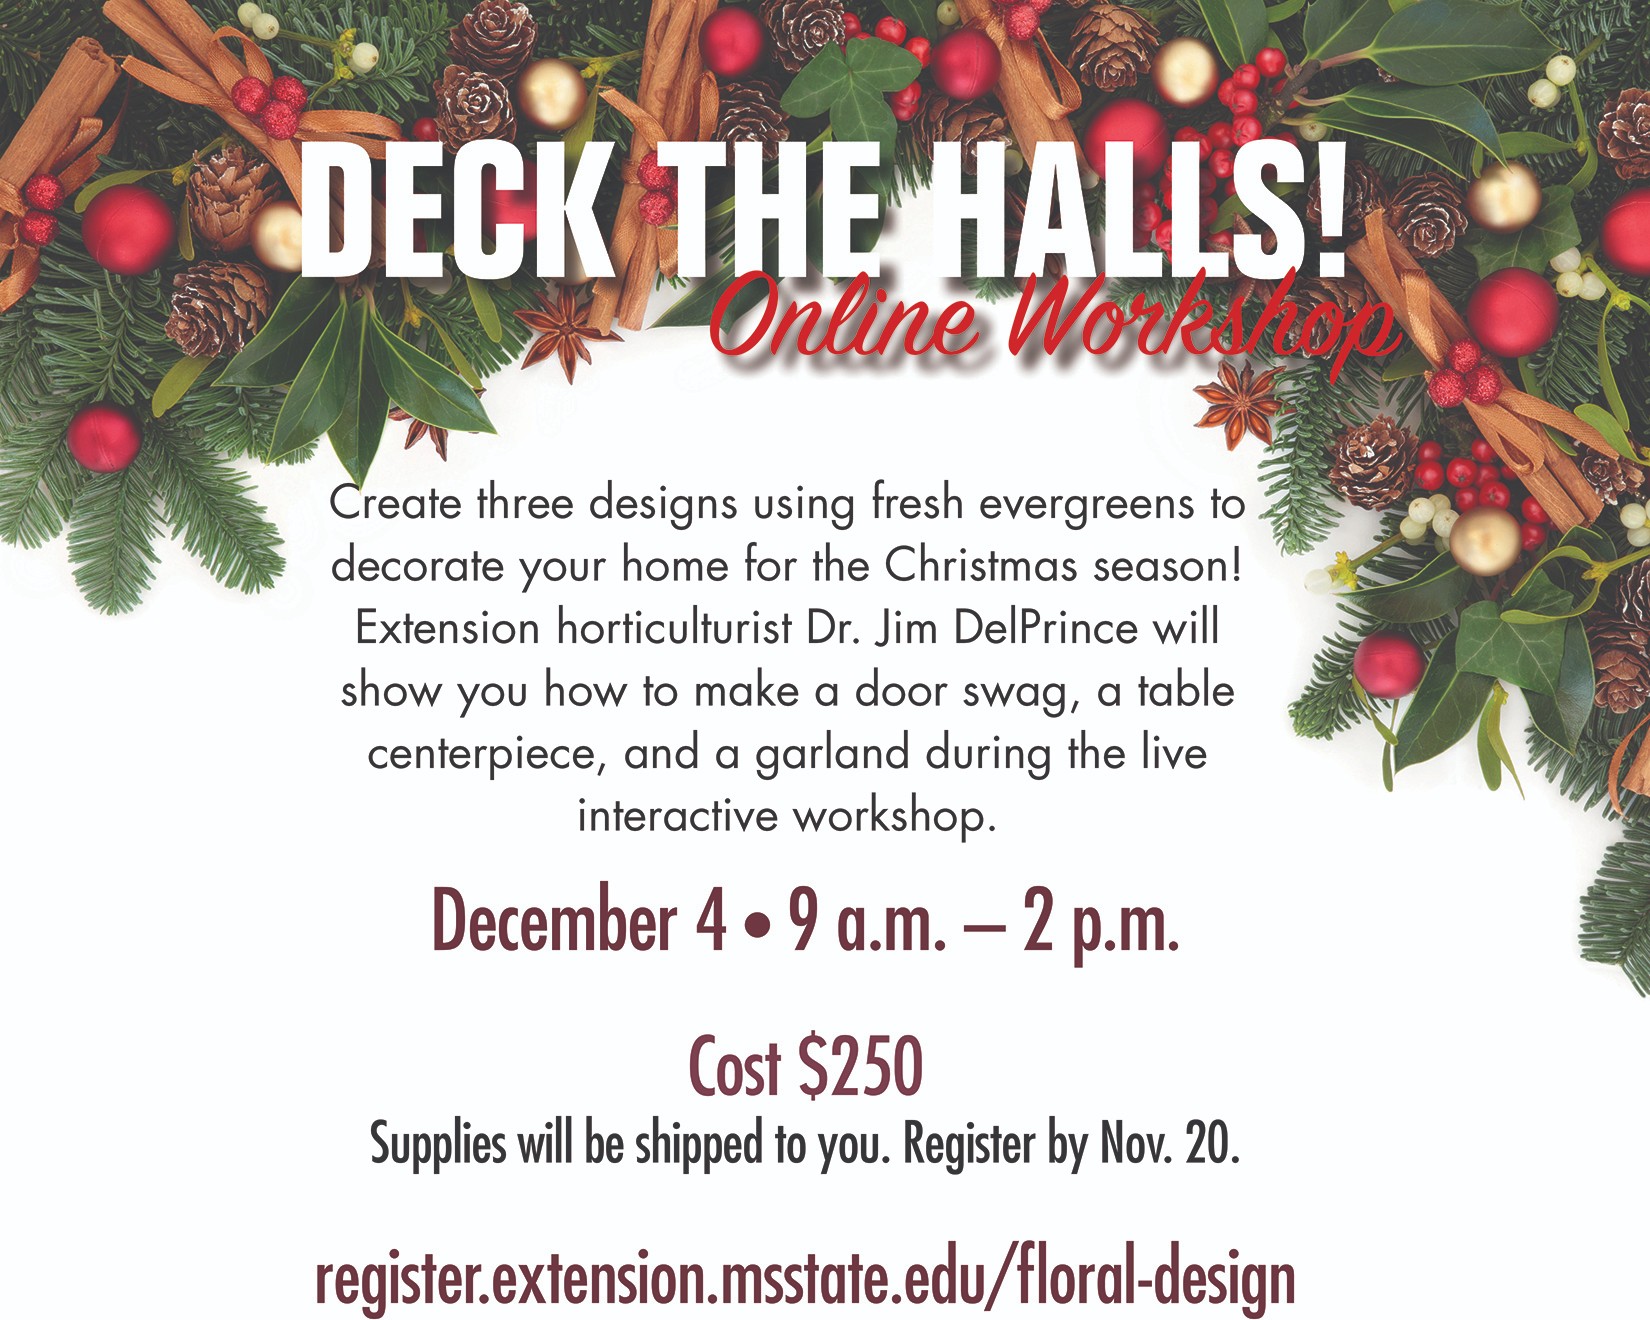 Graphic with holly and red berries promoting MSU Extension Service's "Deck the Halls" online workshop